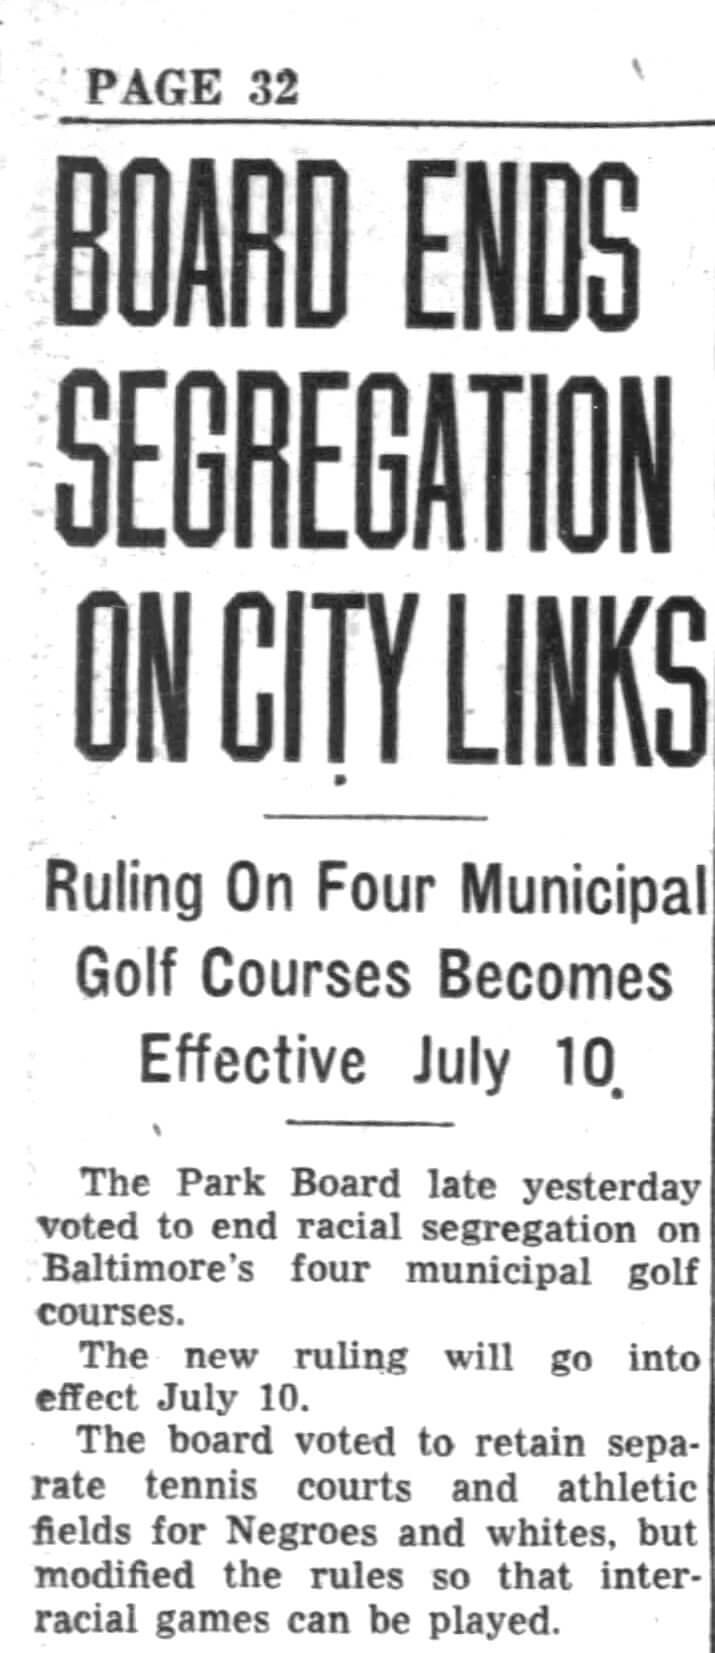 With a newly constituted Park Board, the resolution passed three years before the 1954 Brown V Board of Education outlawed segregation in public education.